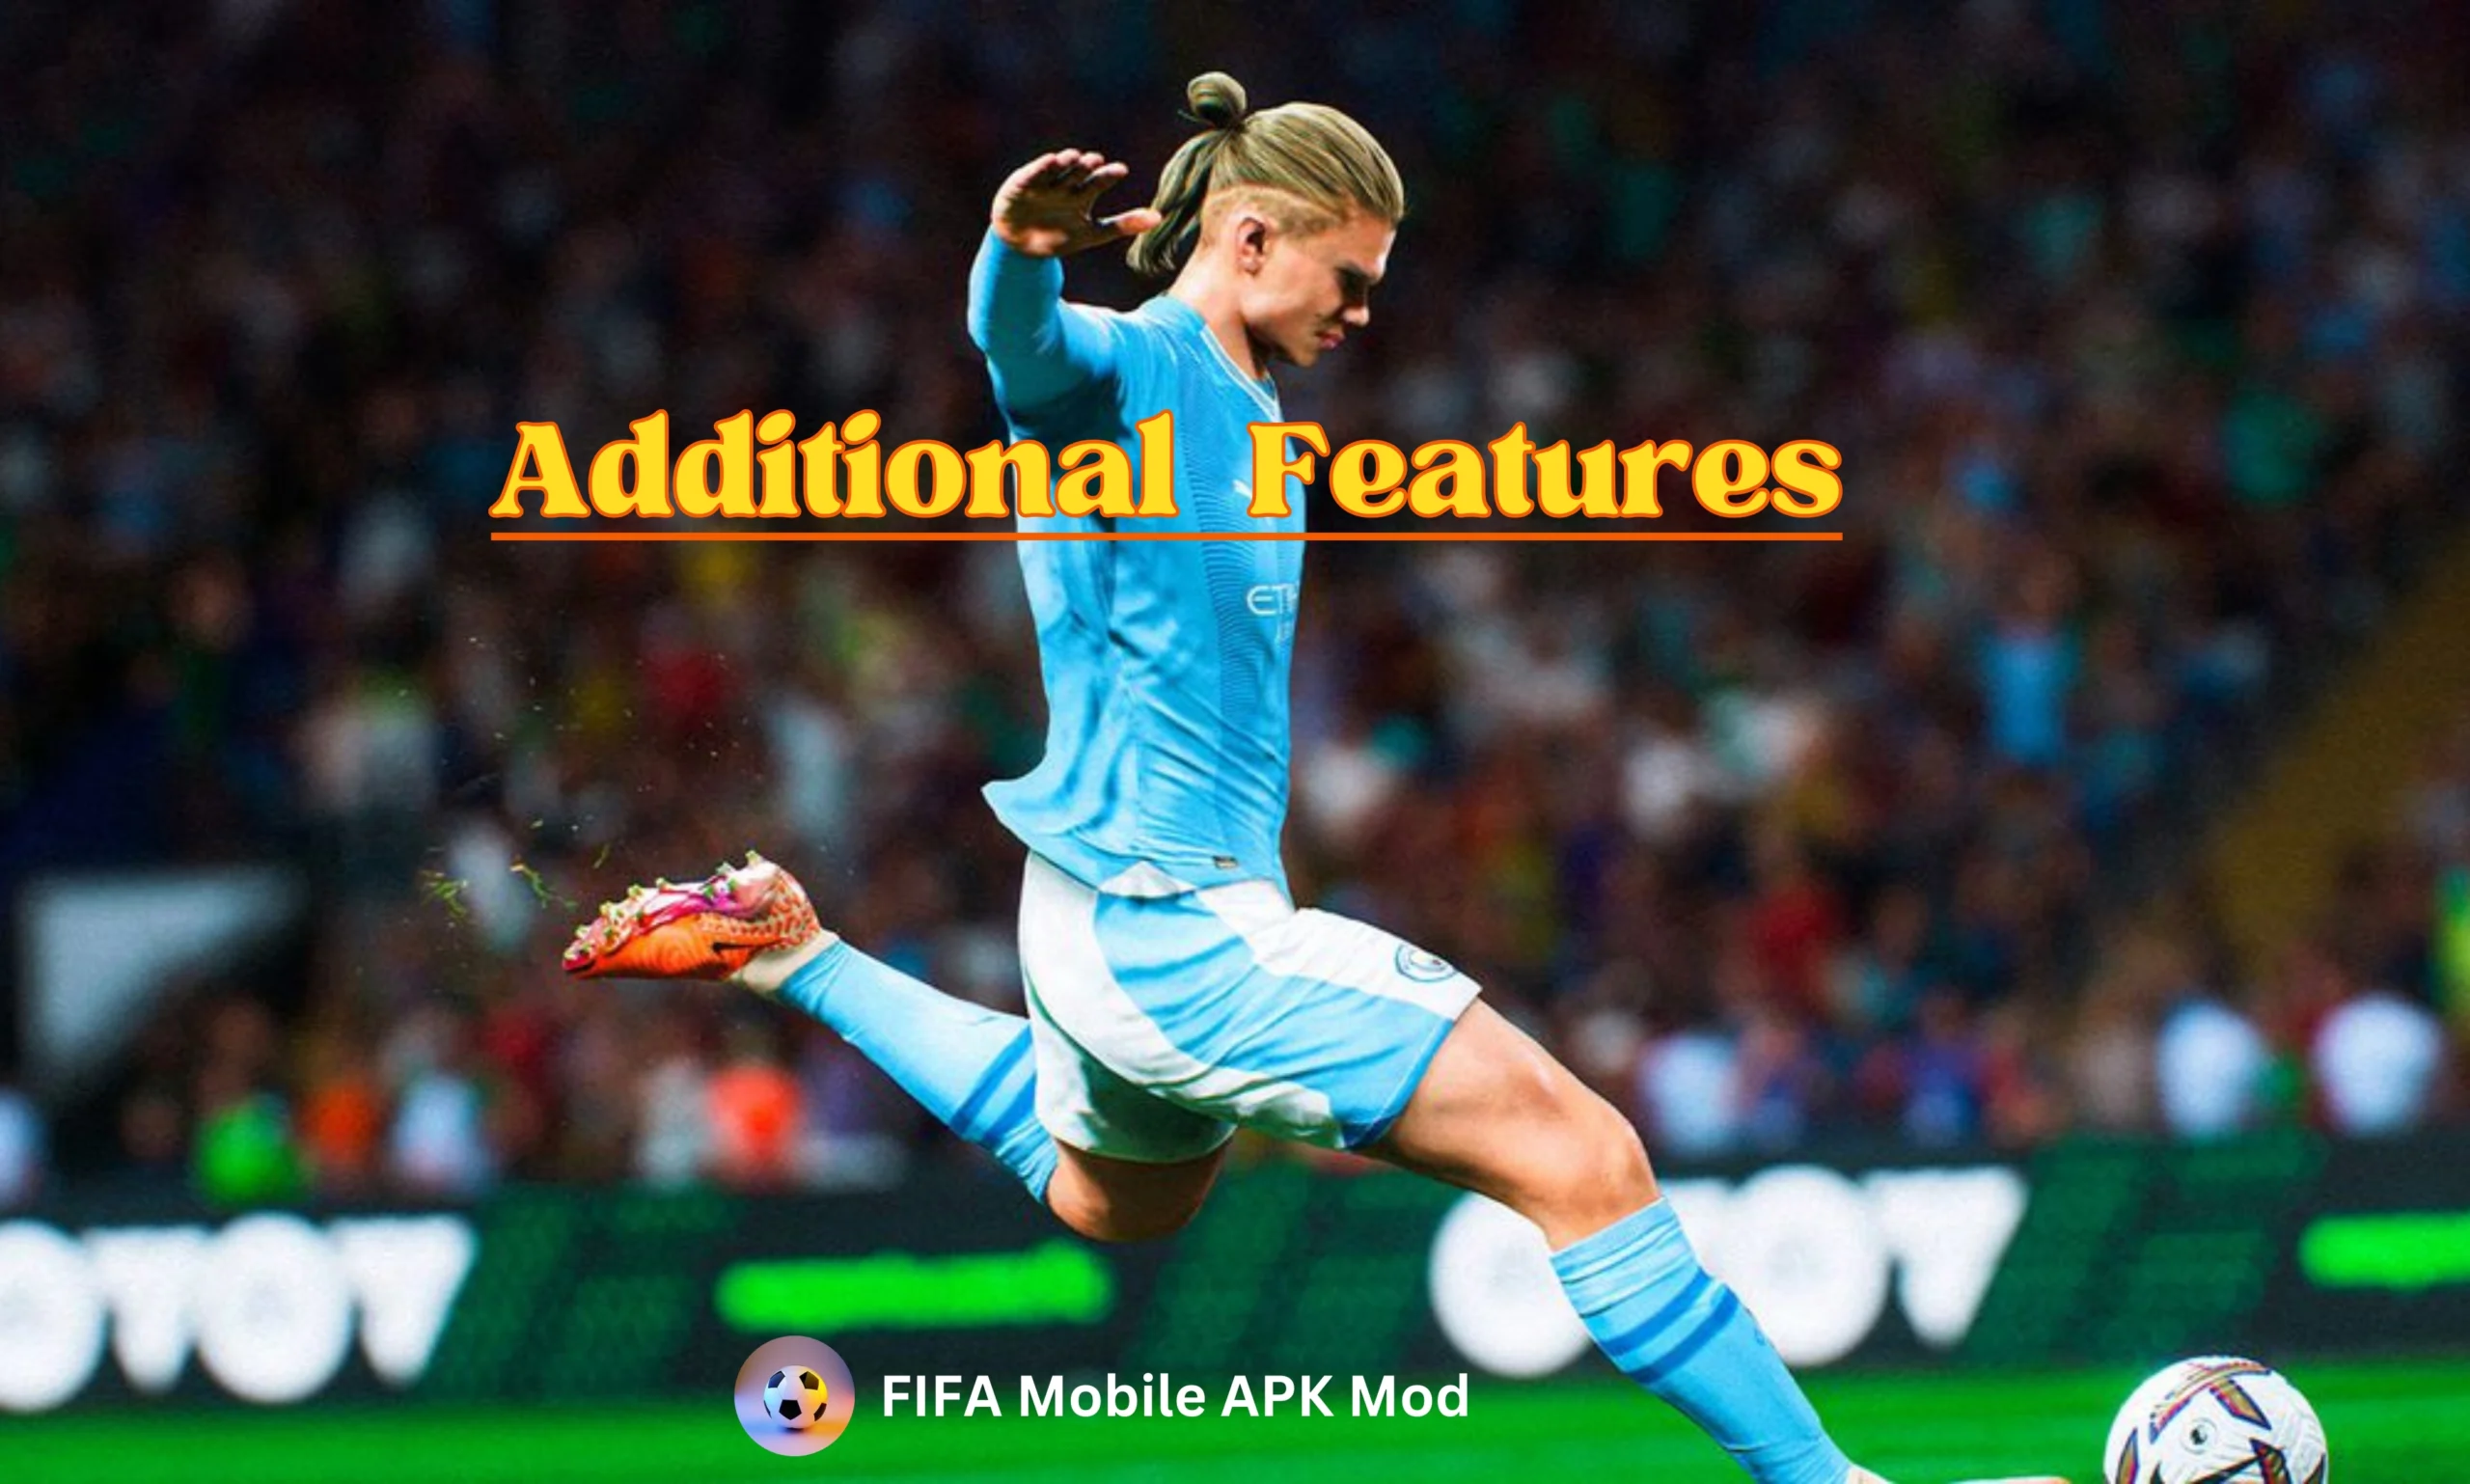 FIFA Mobile Mod APK additional features